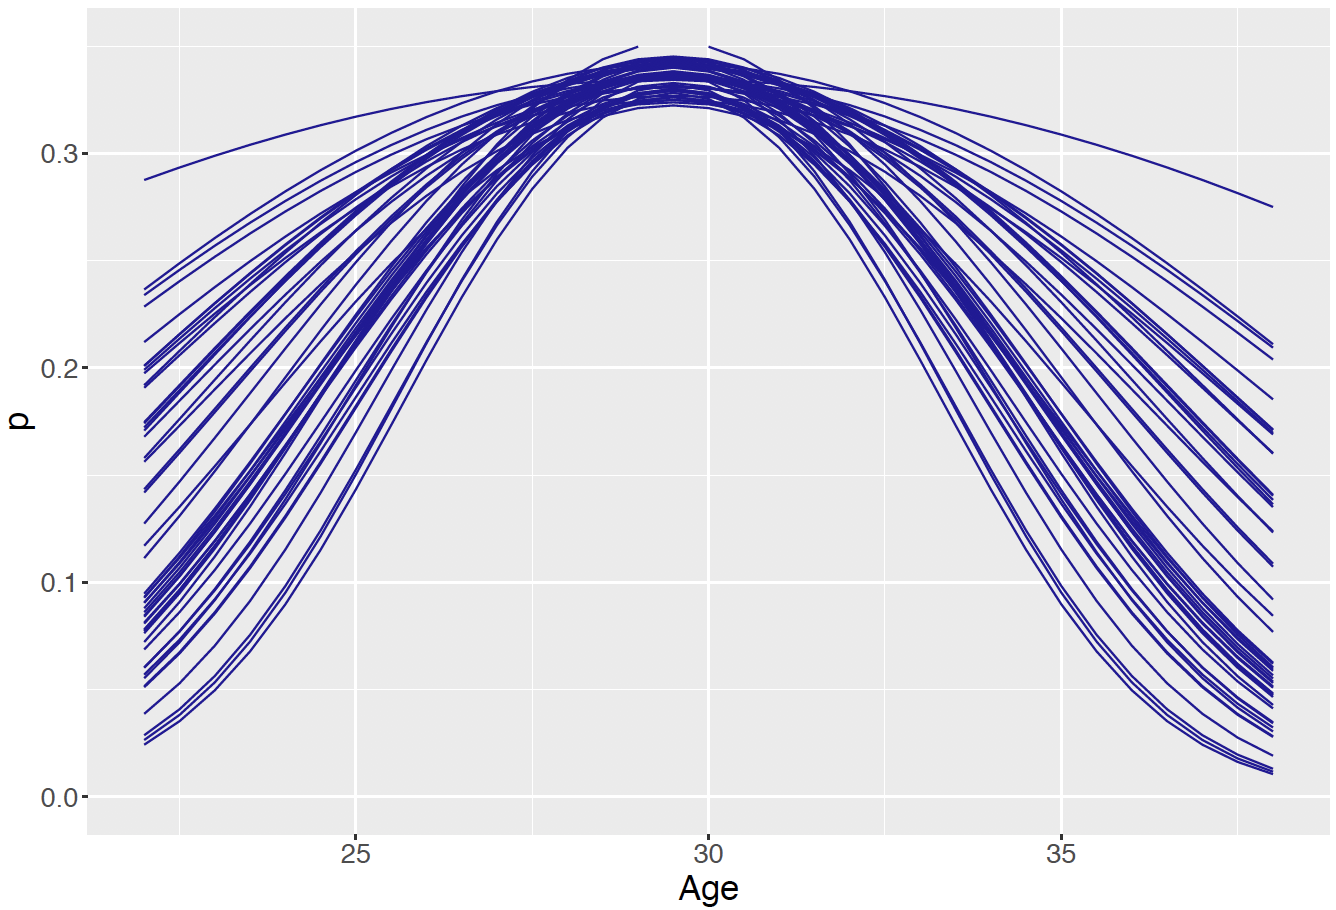 Samples from the posterior distribution of the mean peak age.